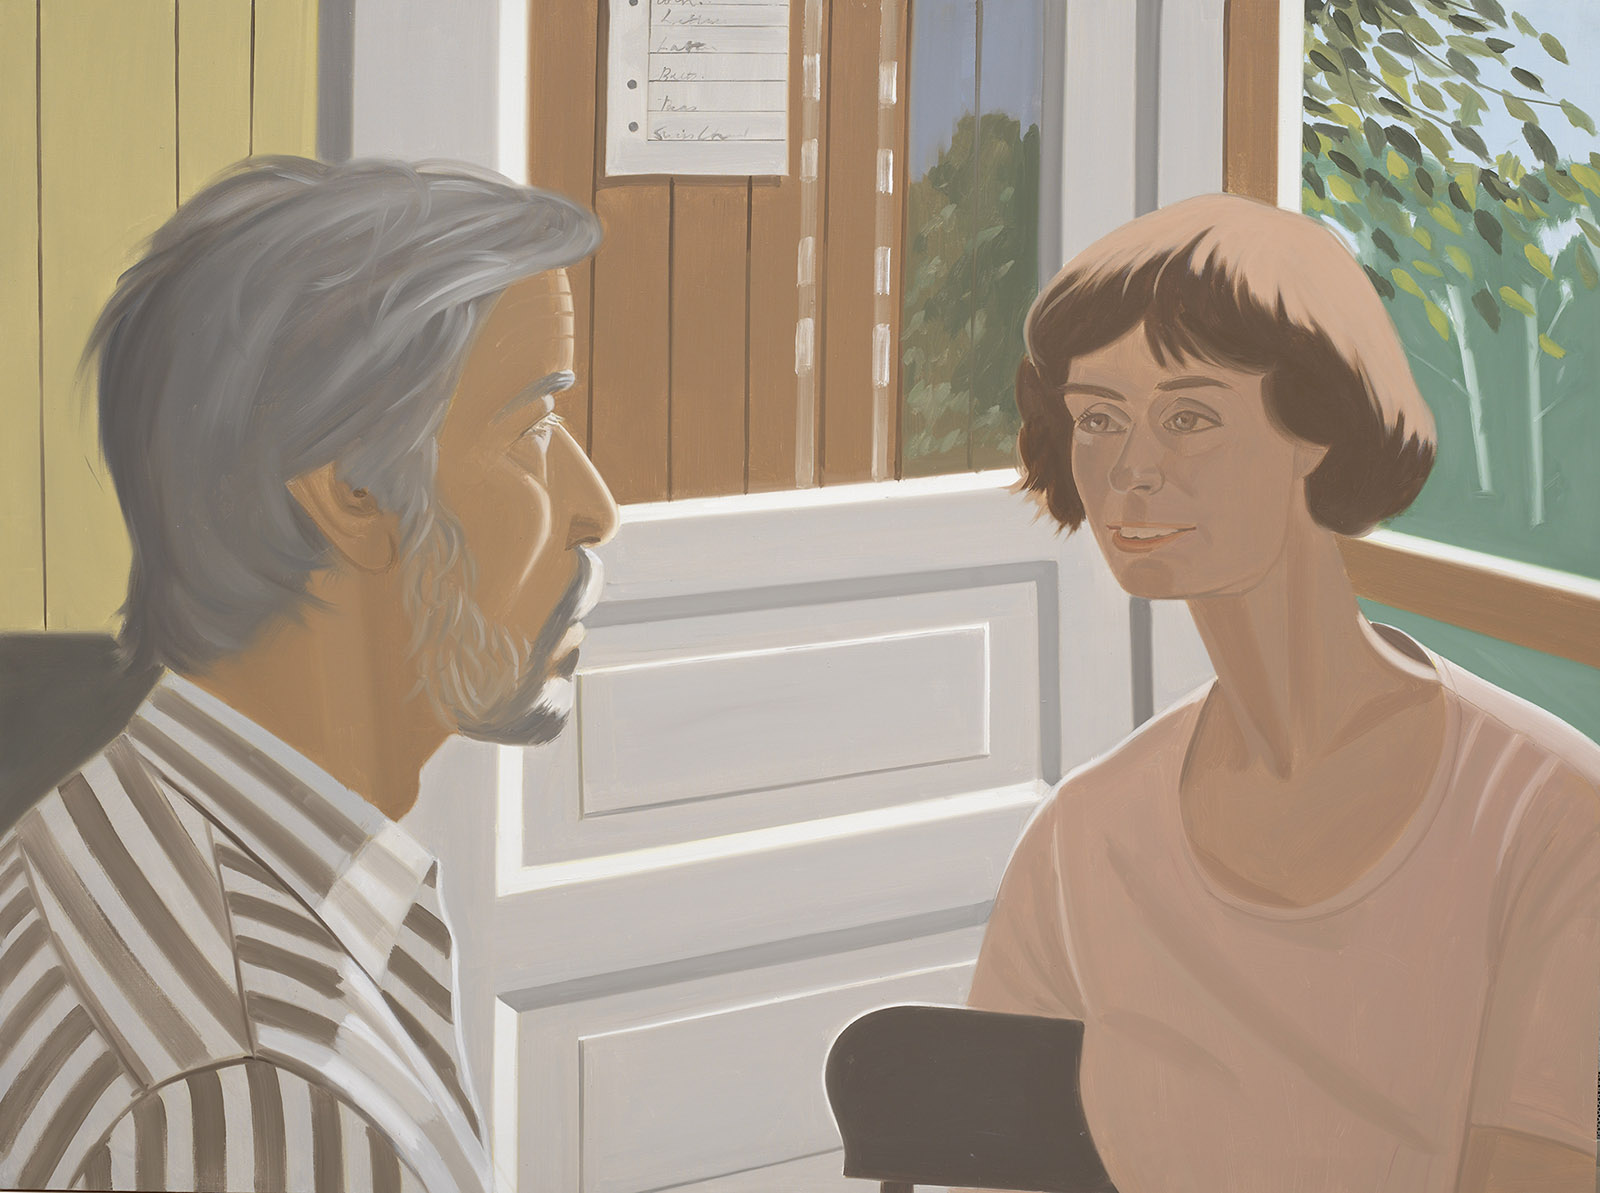 Rudy and Yvonne; painting by Alex Katz